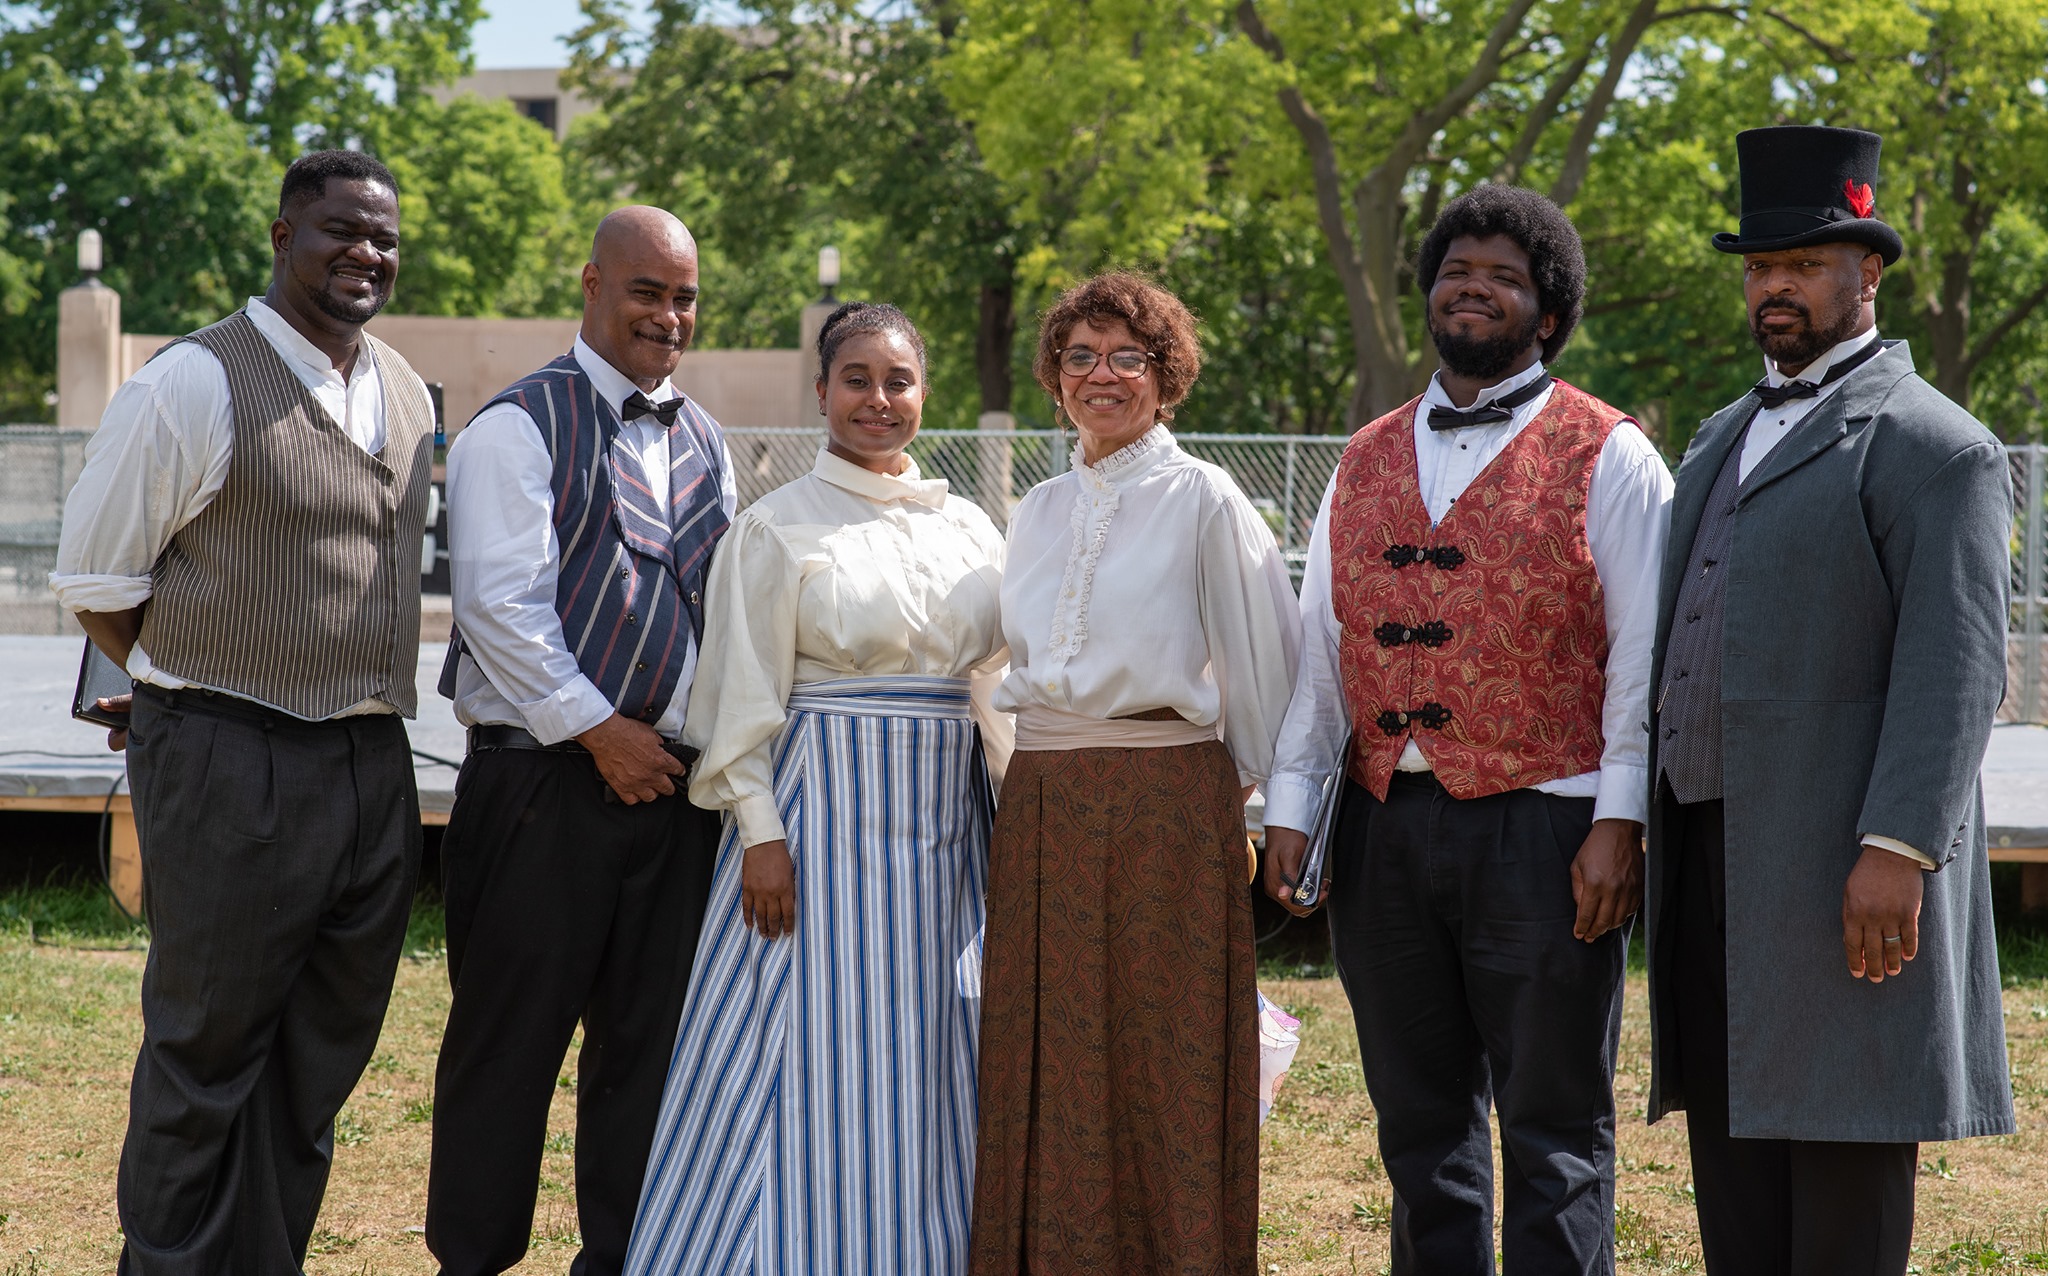 Enduring Families Project brings Black history to life